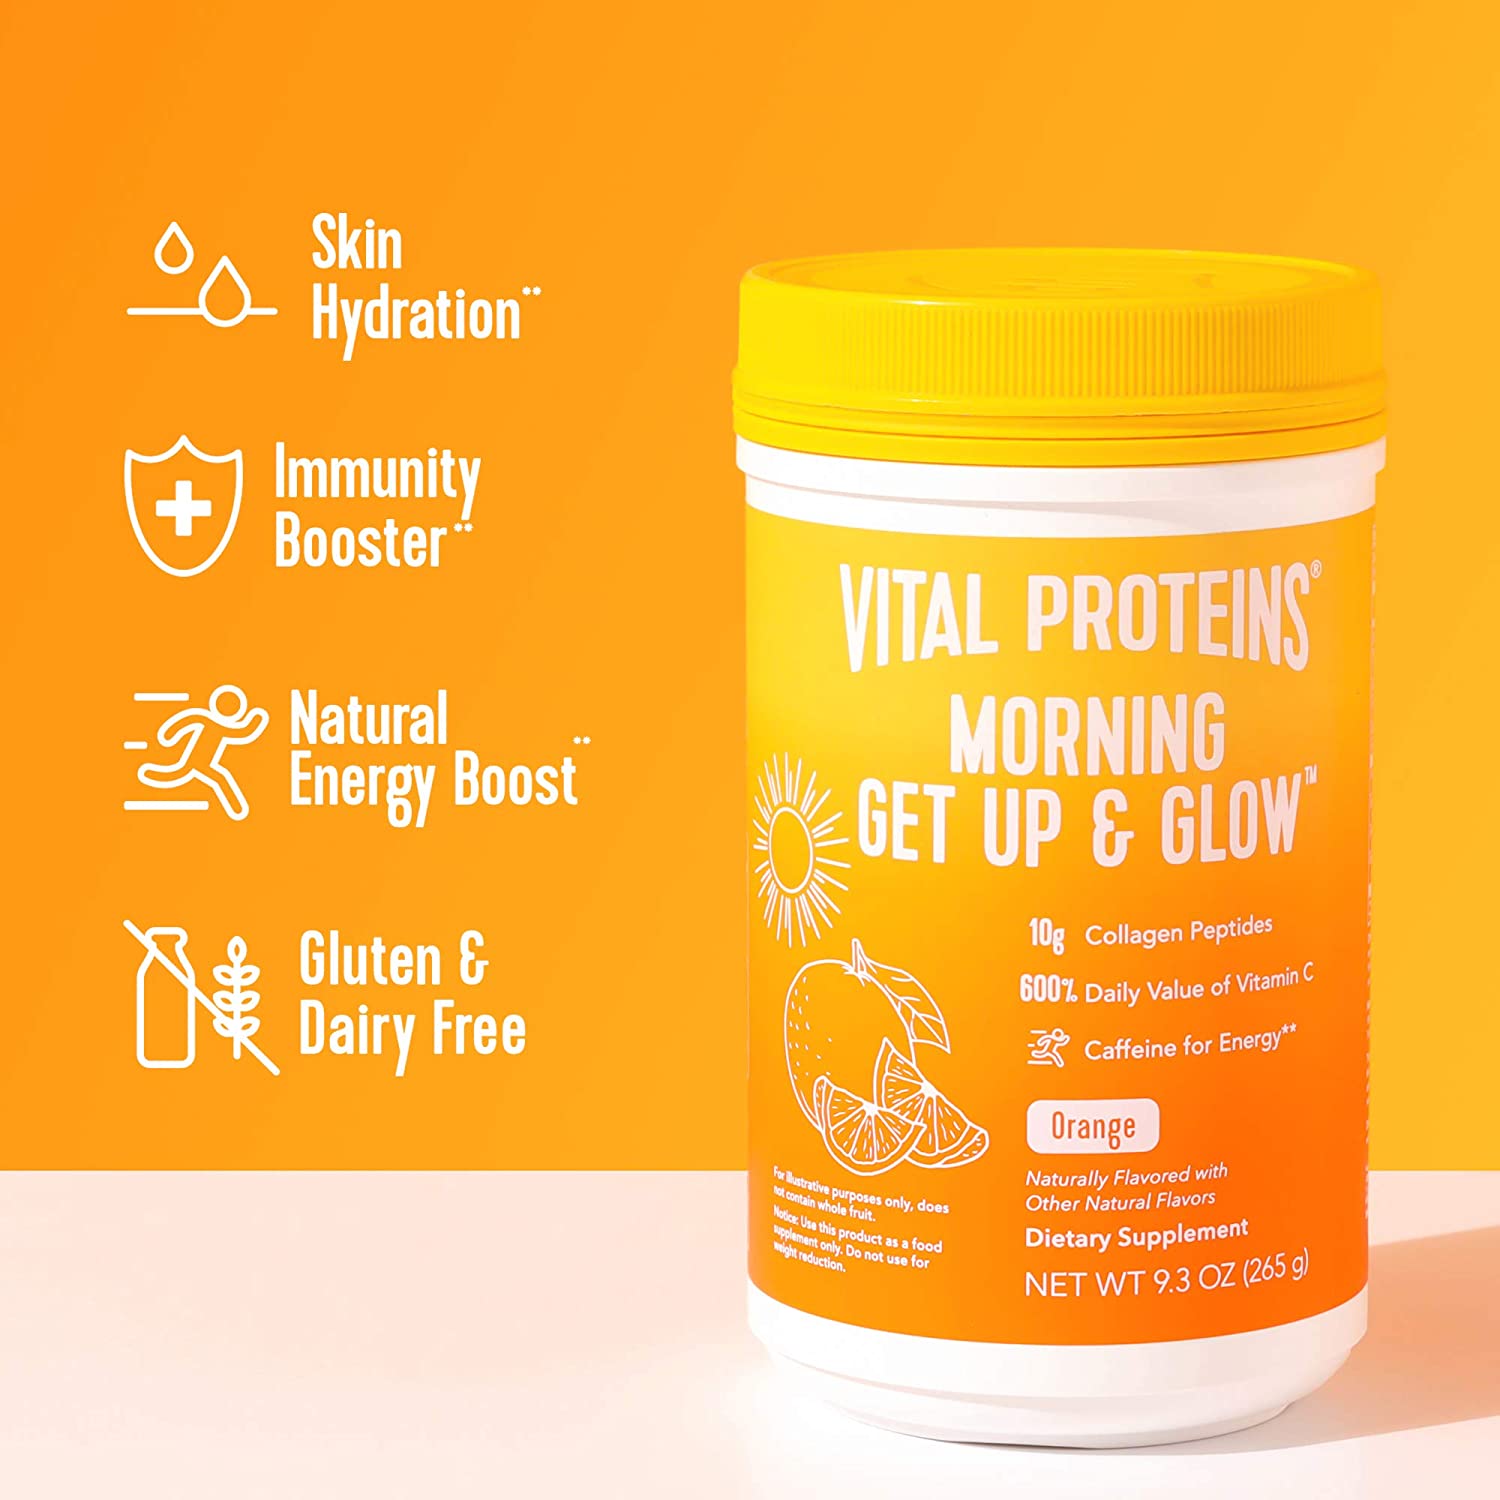 Vital Proteins Morning Get Up and Glow Collagen Powder - 9.3 oz-3